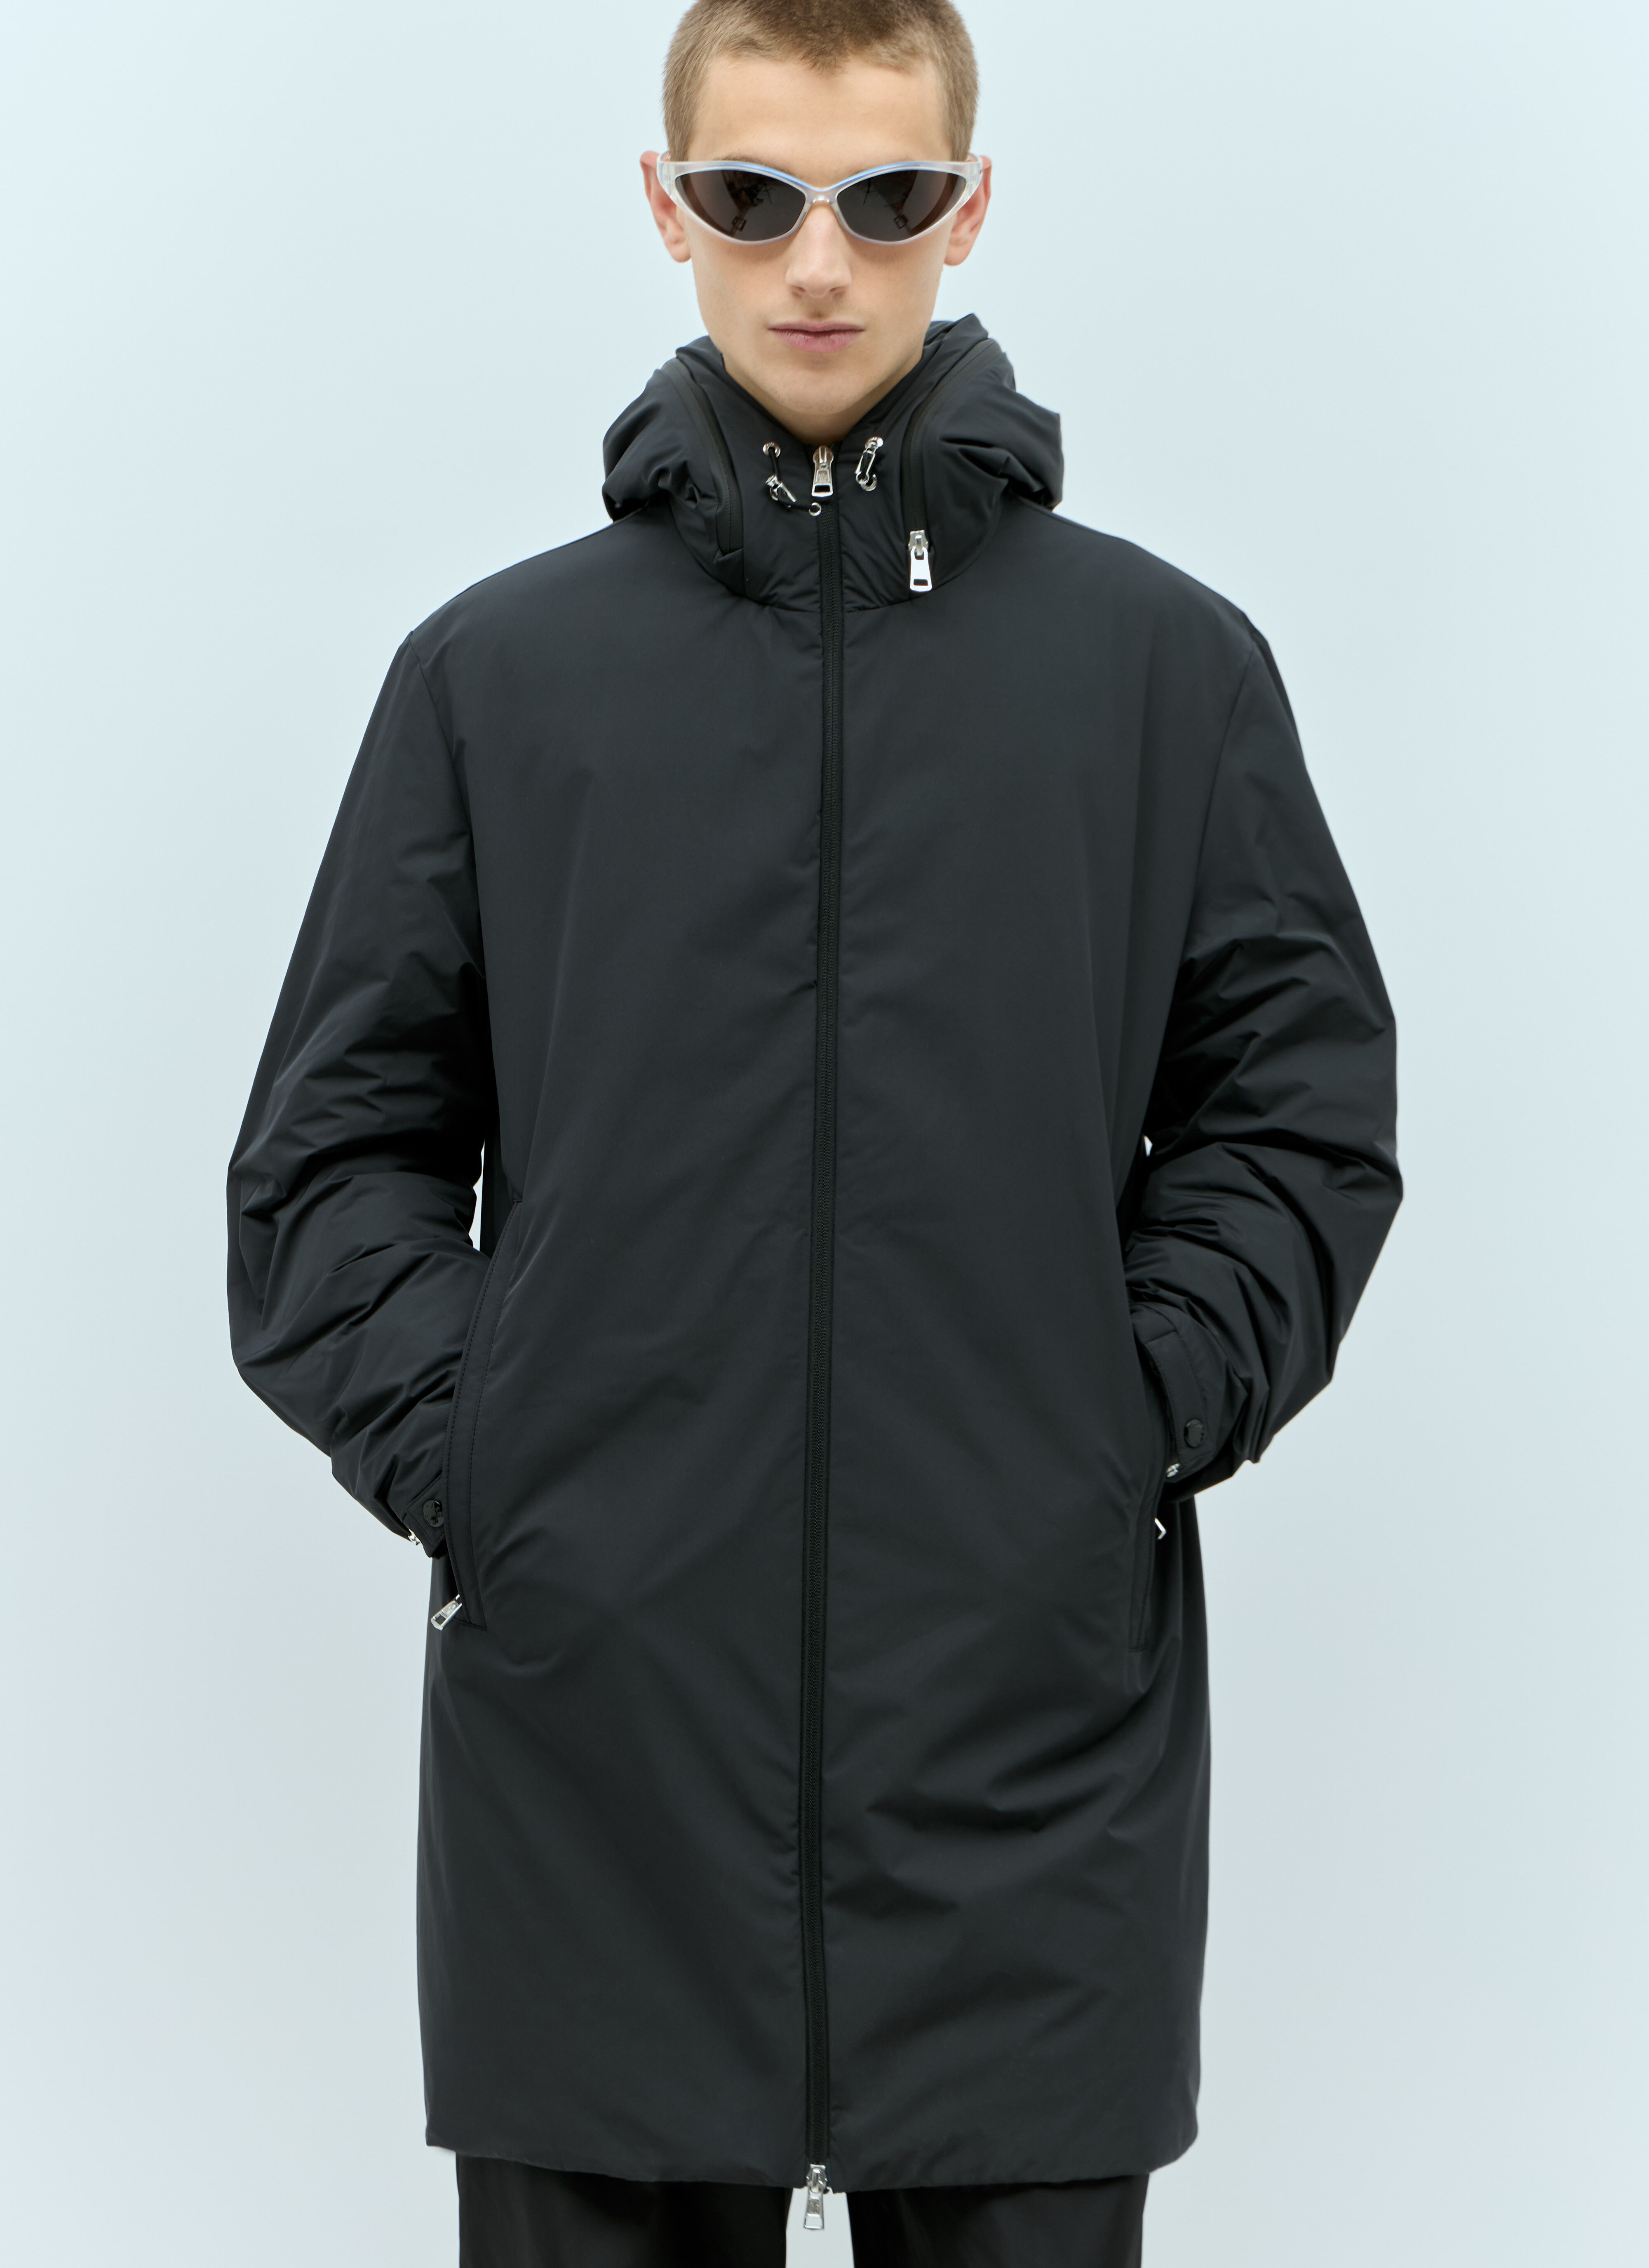 Gallery Dept. Nible Long Down Parka Blue gdp0153032